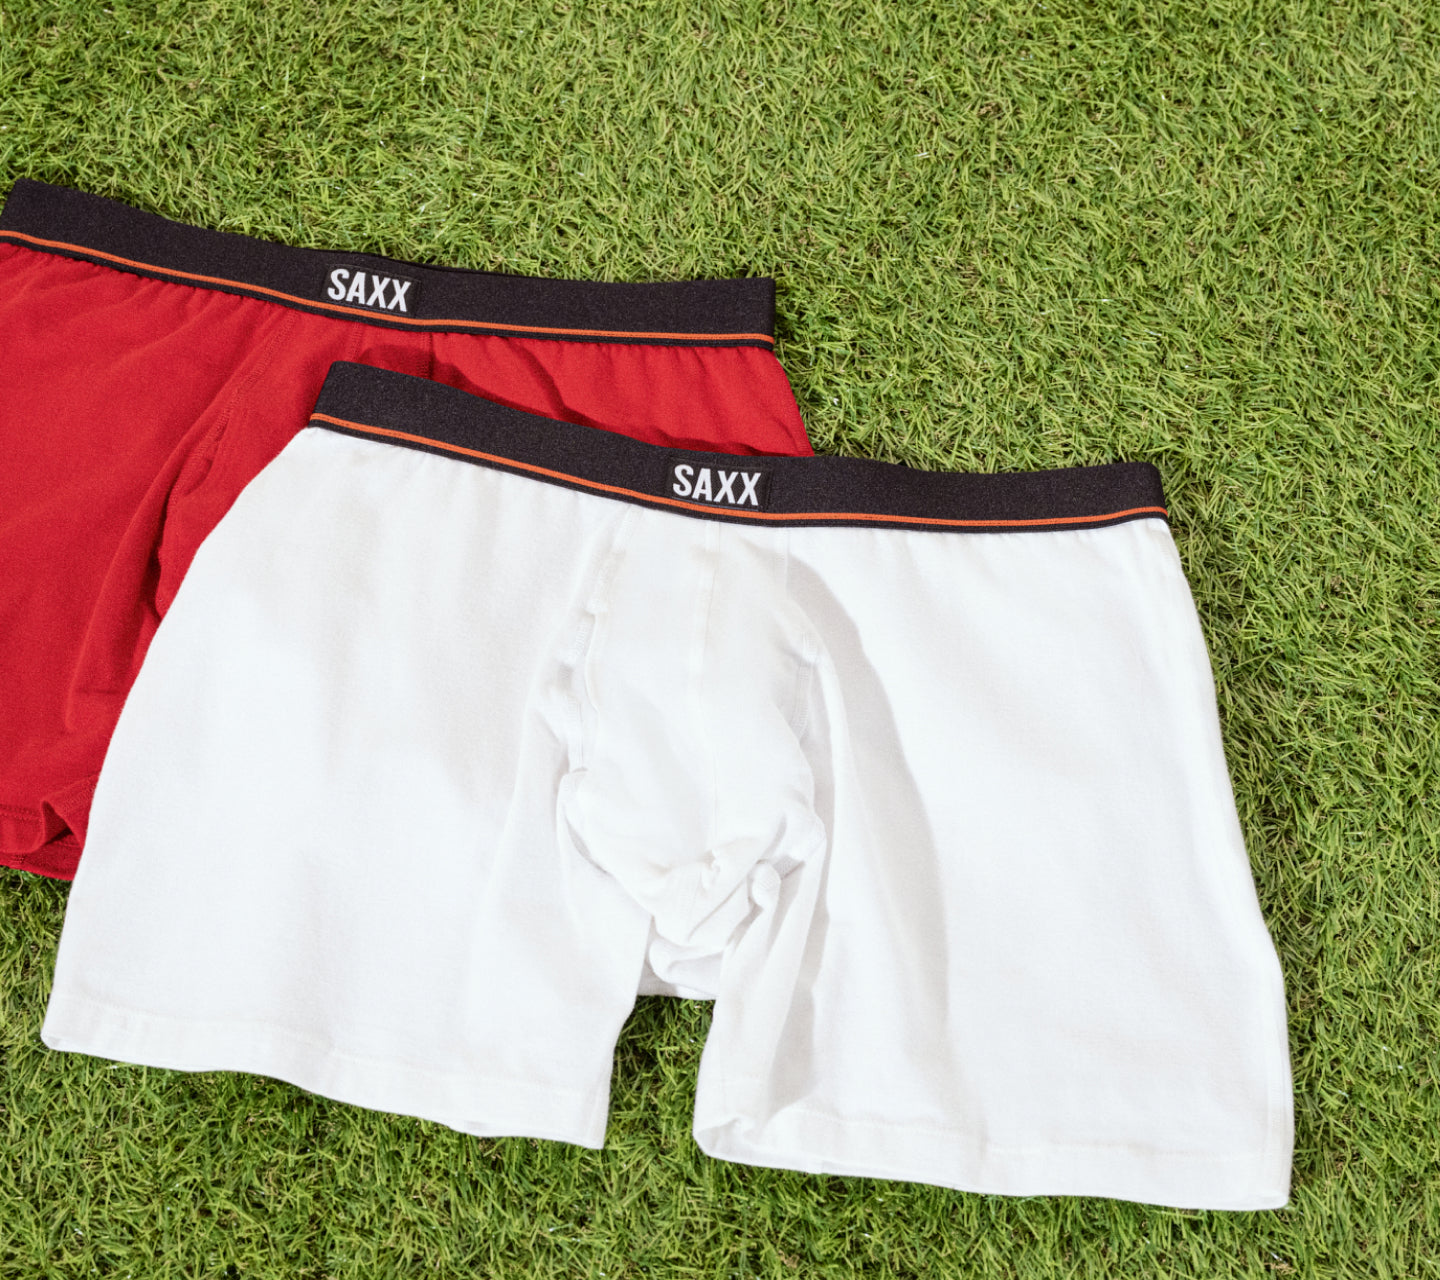 Two pair of boxer briefs, one white and one red laid on astro turf. The white pair is laid slightly on top of the red pair.